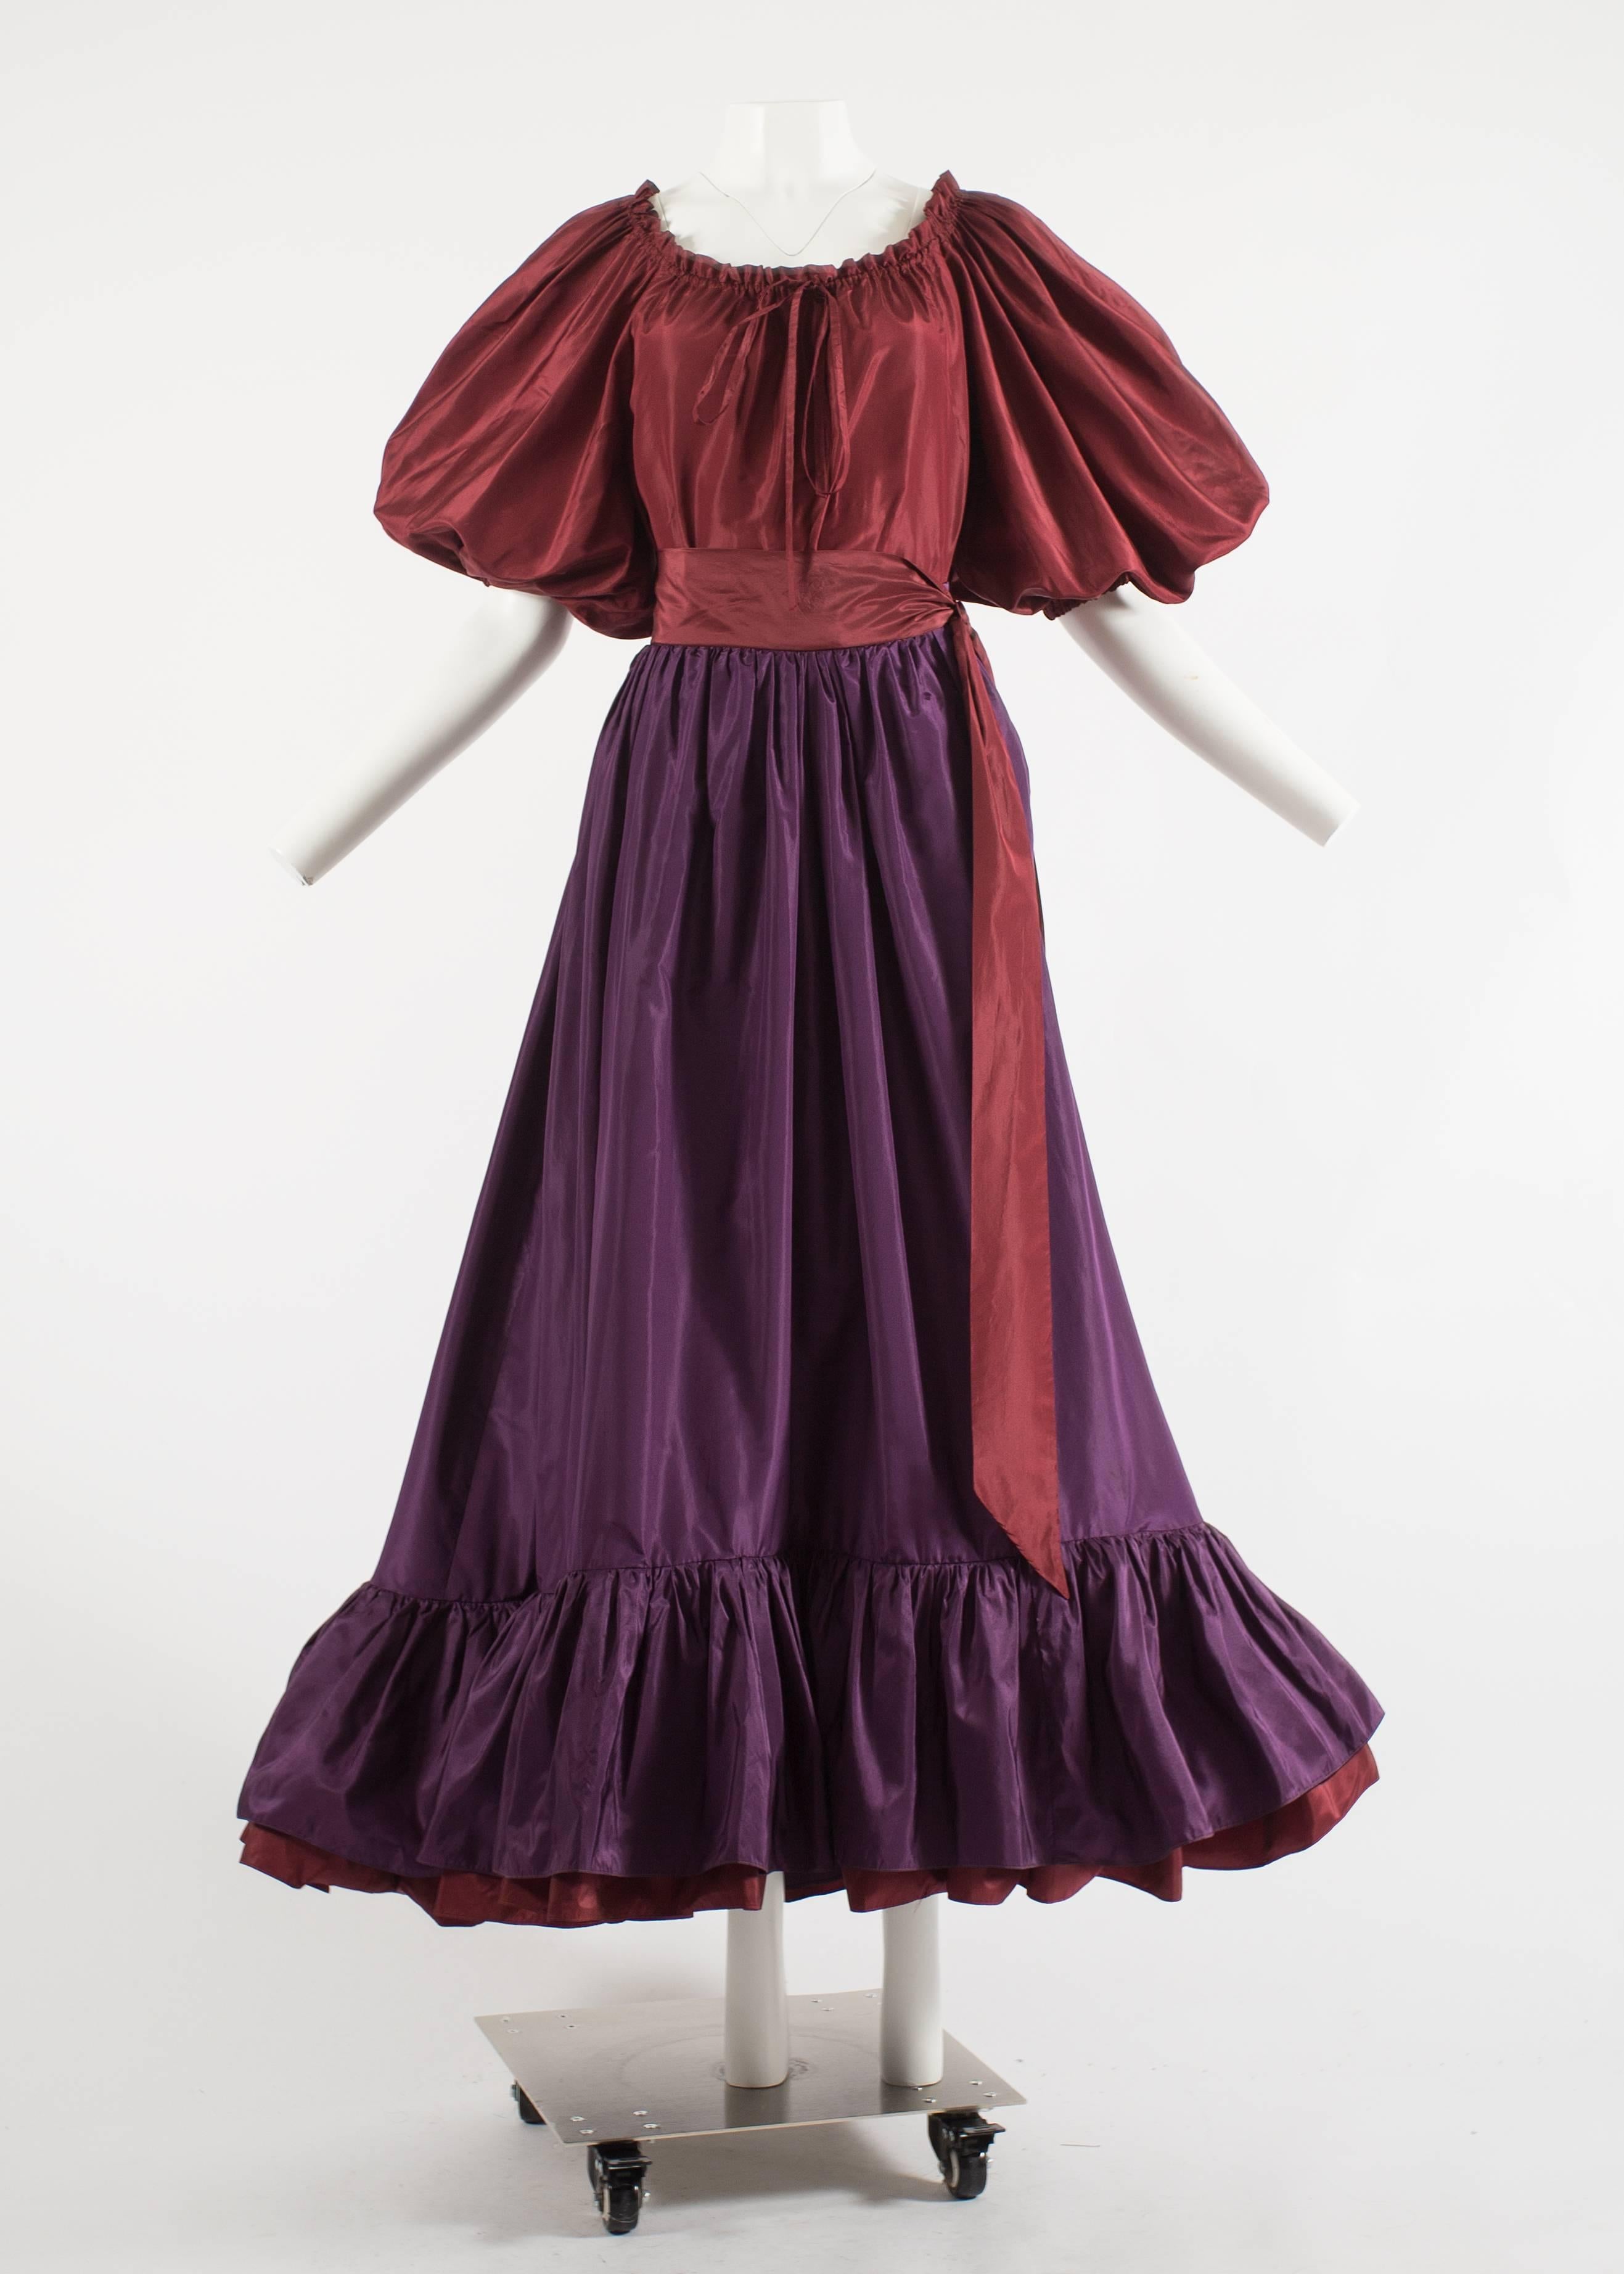 Yves Saint Laurent 1978 silk taffeta blouse and skirt ensemble 

- Burgundy blouse with drawstring collar, bow fastening, and balloon sleeves with elasticated cuff. 

- High waisted tiered plum skirt with a burgundy sash, fastening with a long